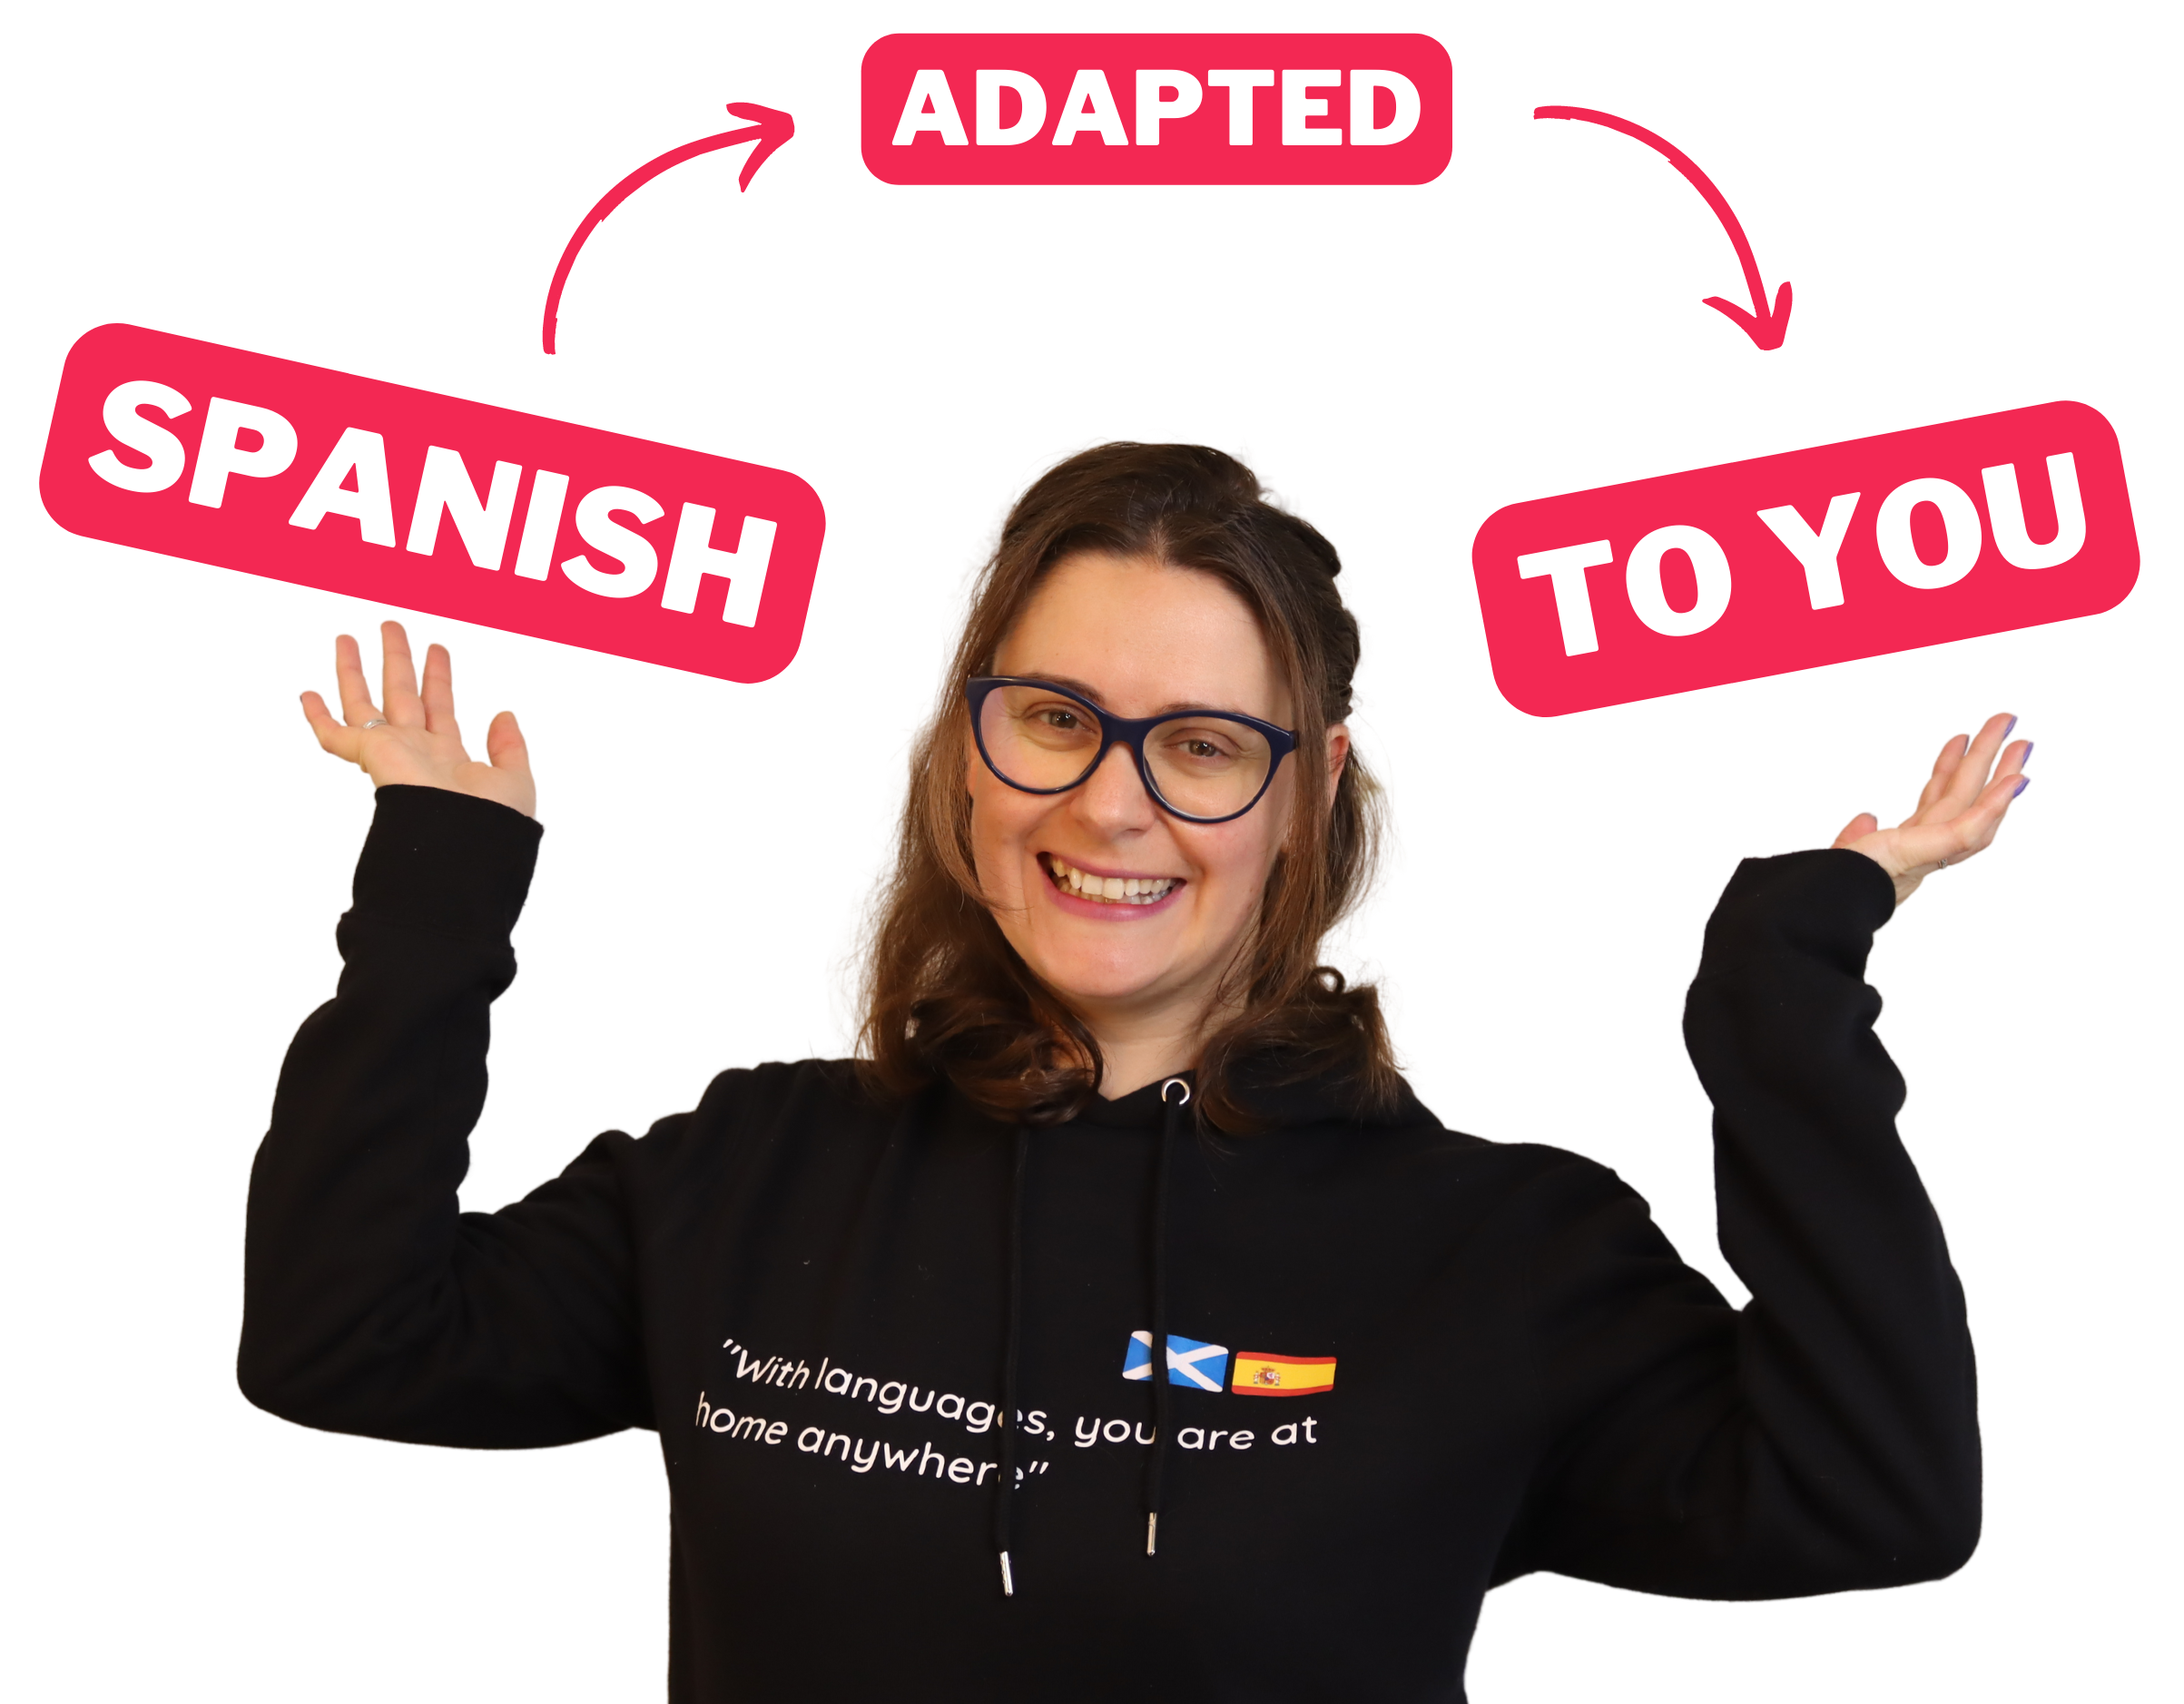 MySpanishNow lessons are adapted to your needs and goals